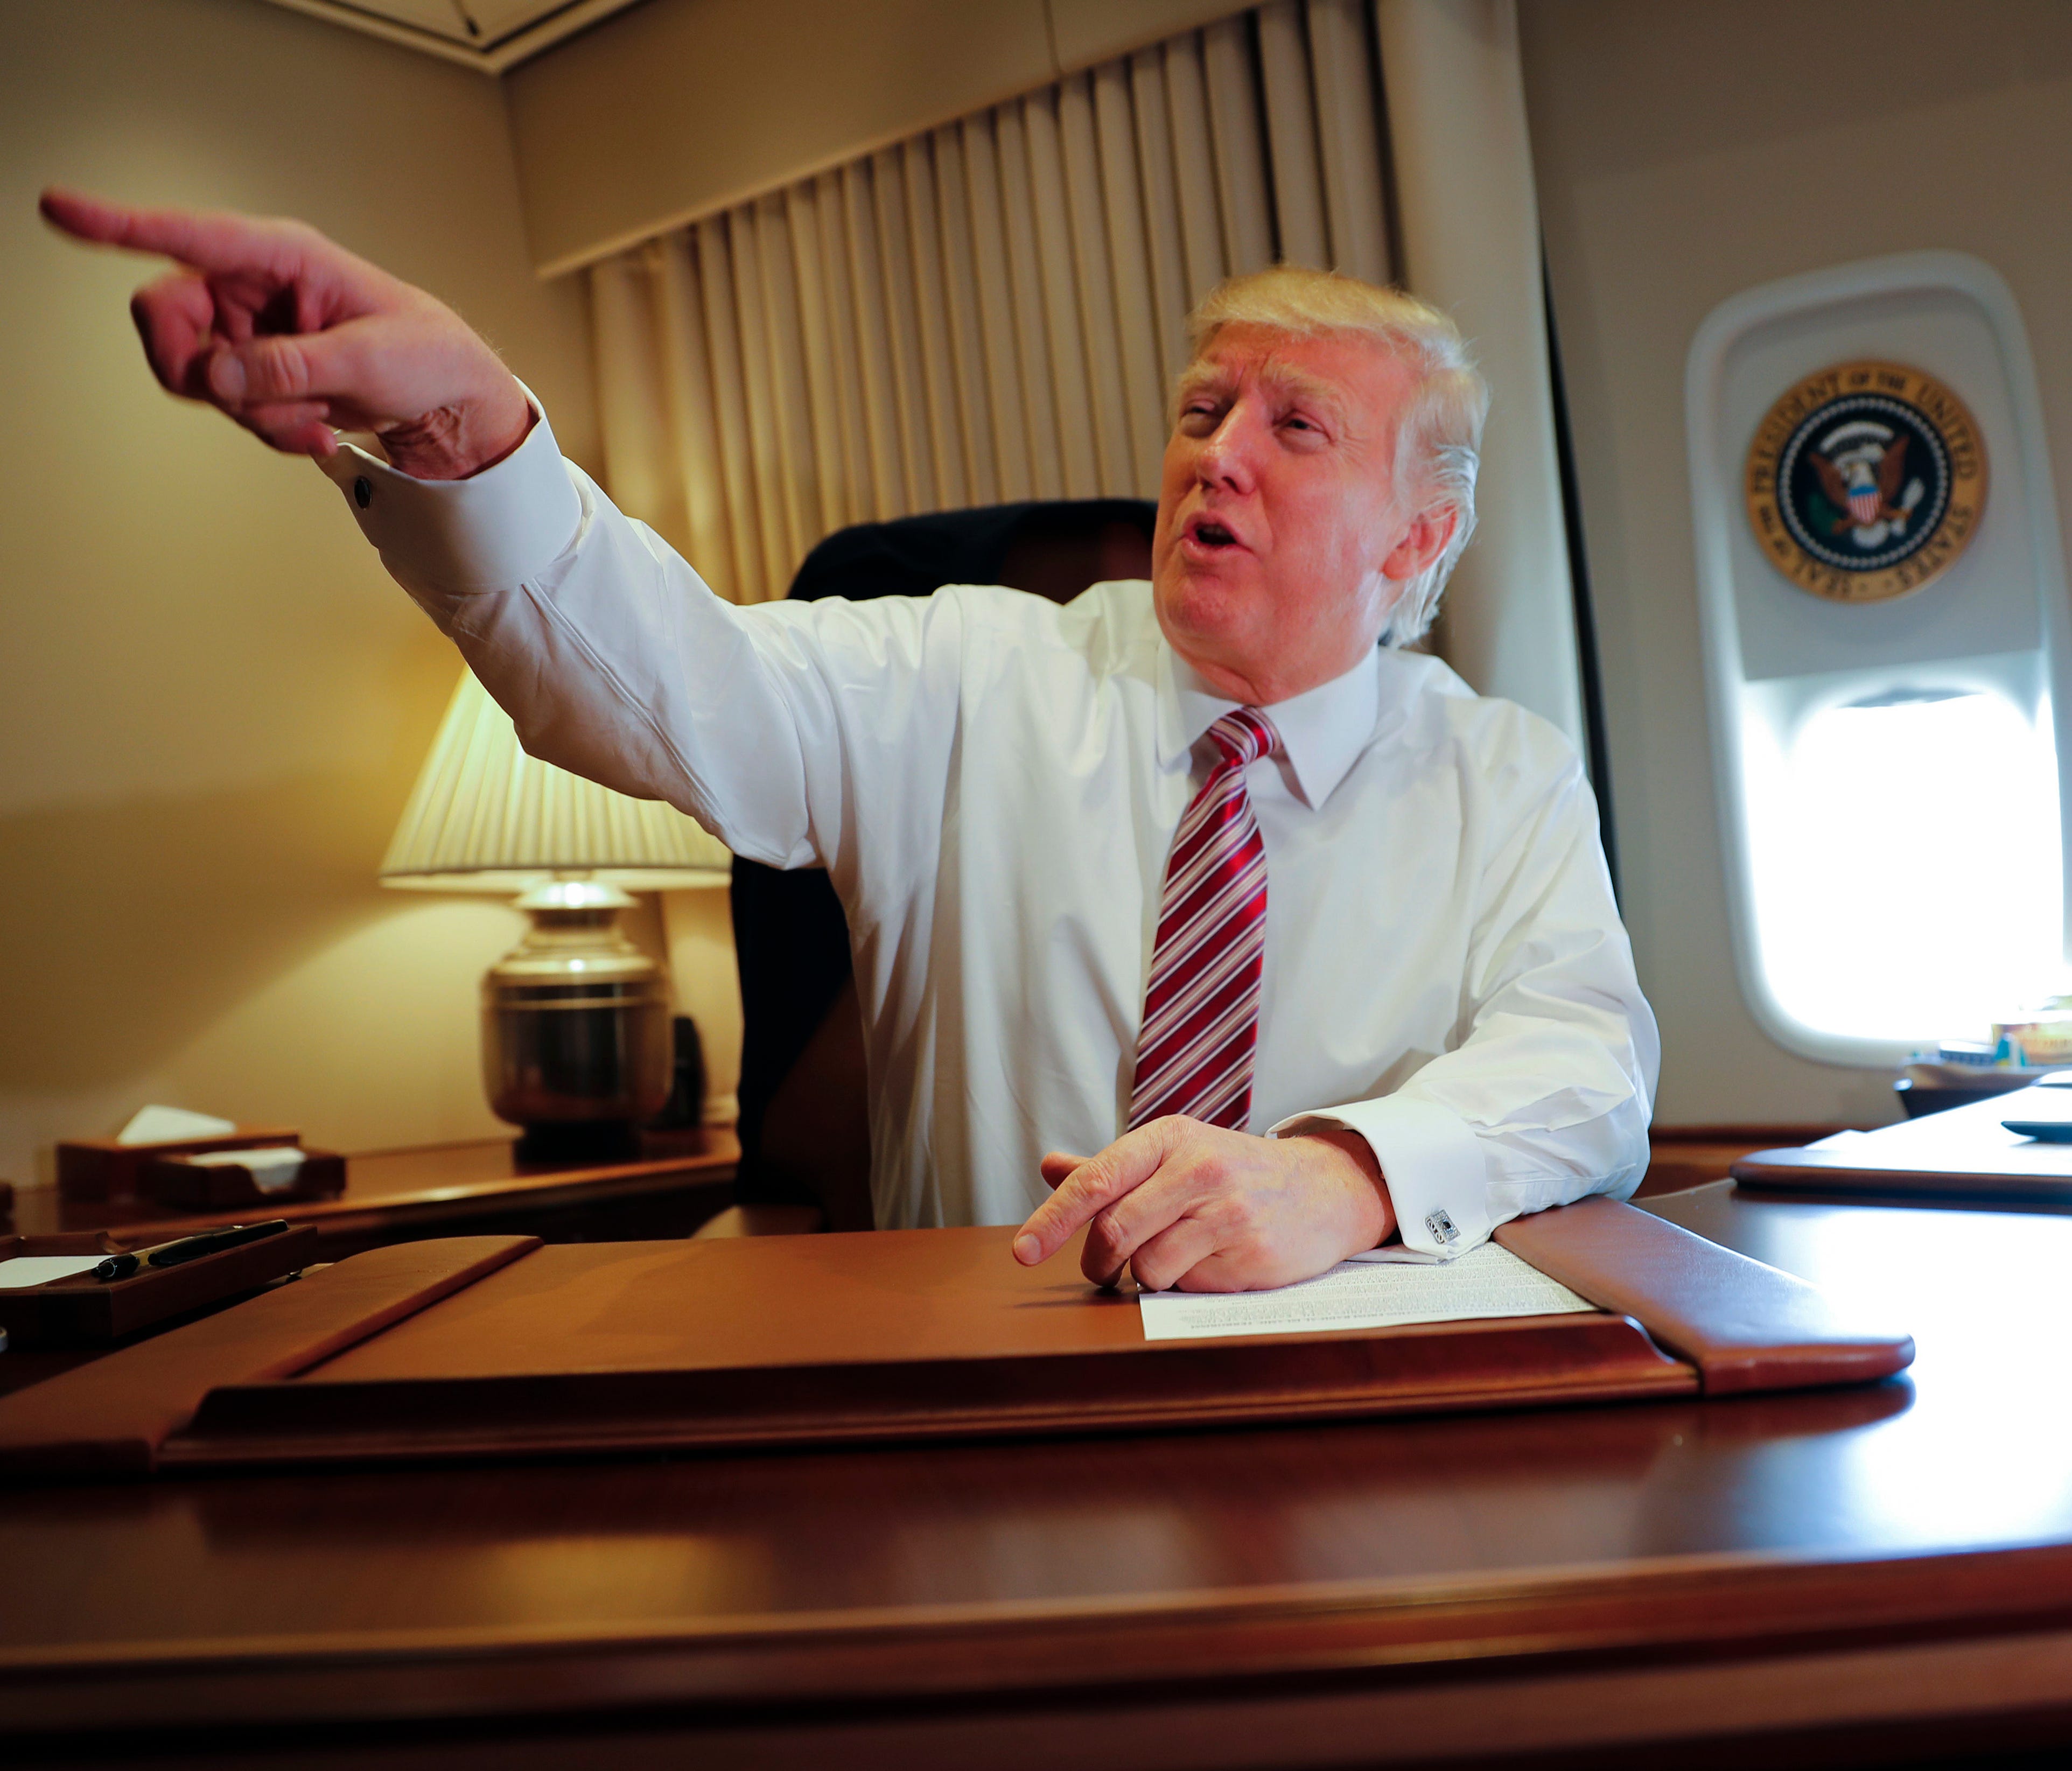 Trump points toward members of the media while seated at his desk on Air Force One upon his arrival at Andrews Air Force Base on Jan. 26, 2017.